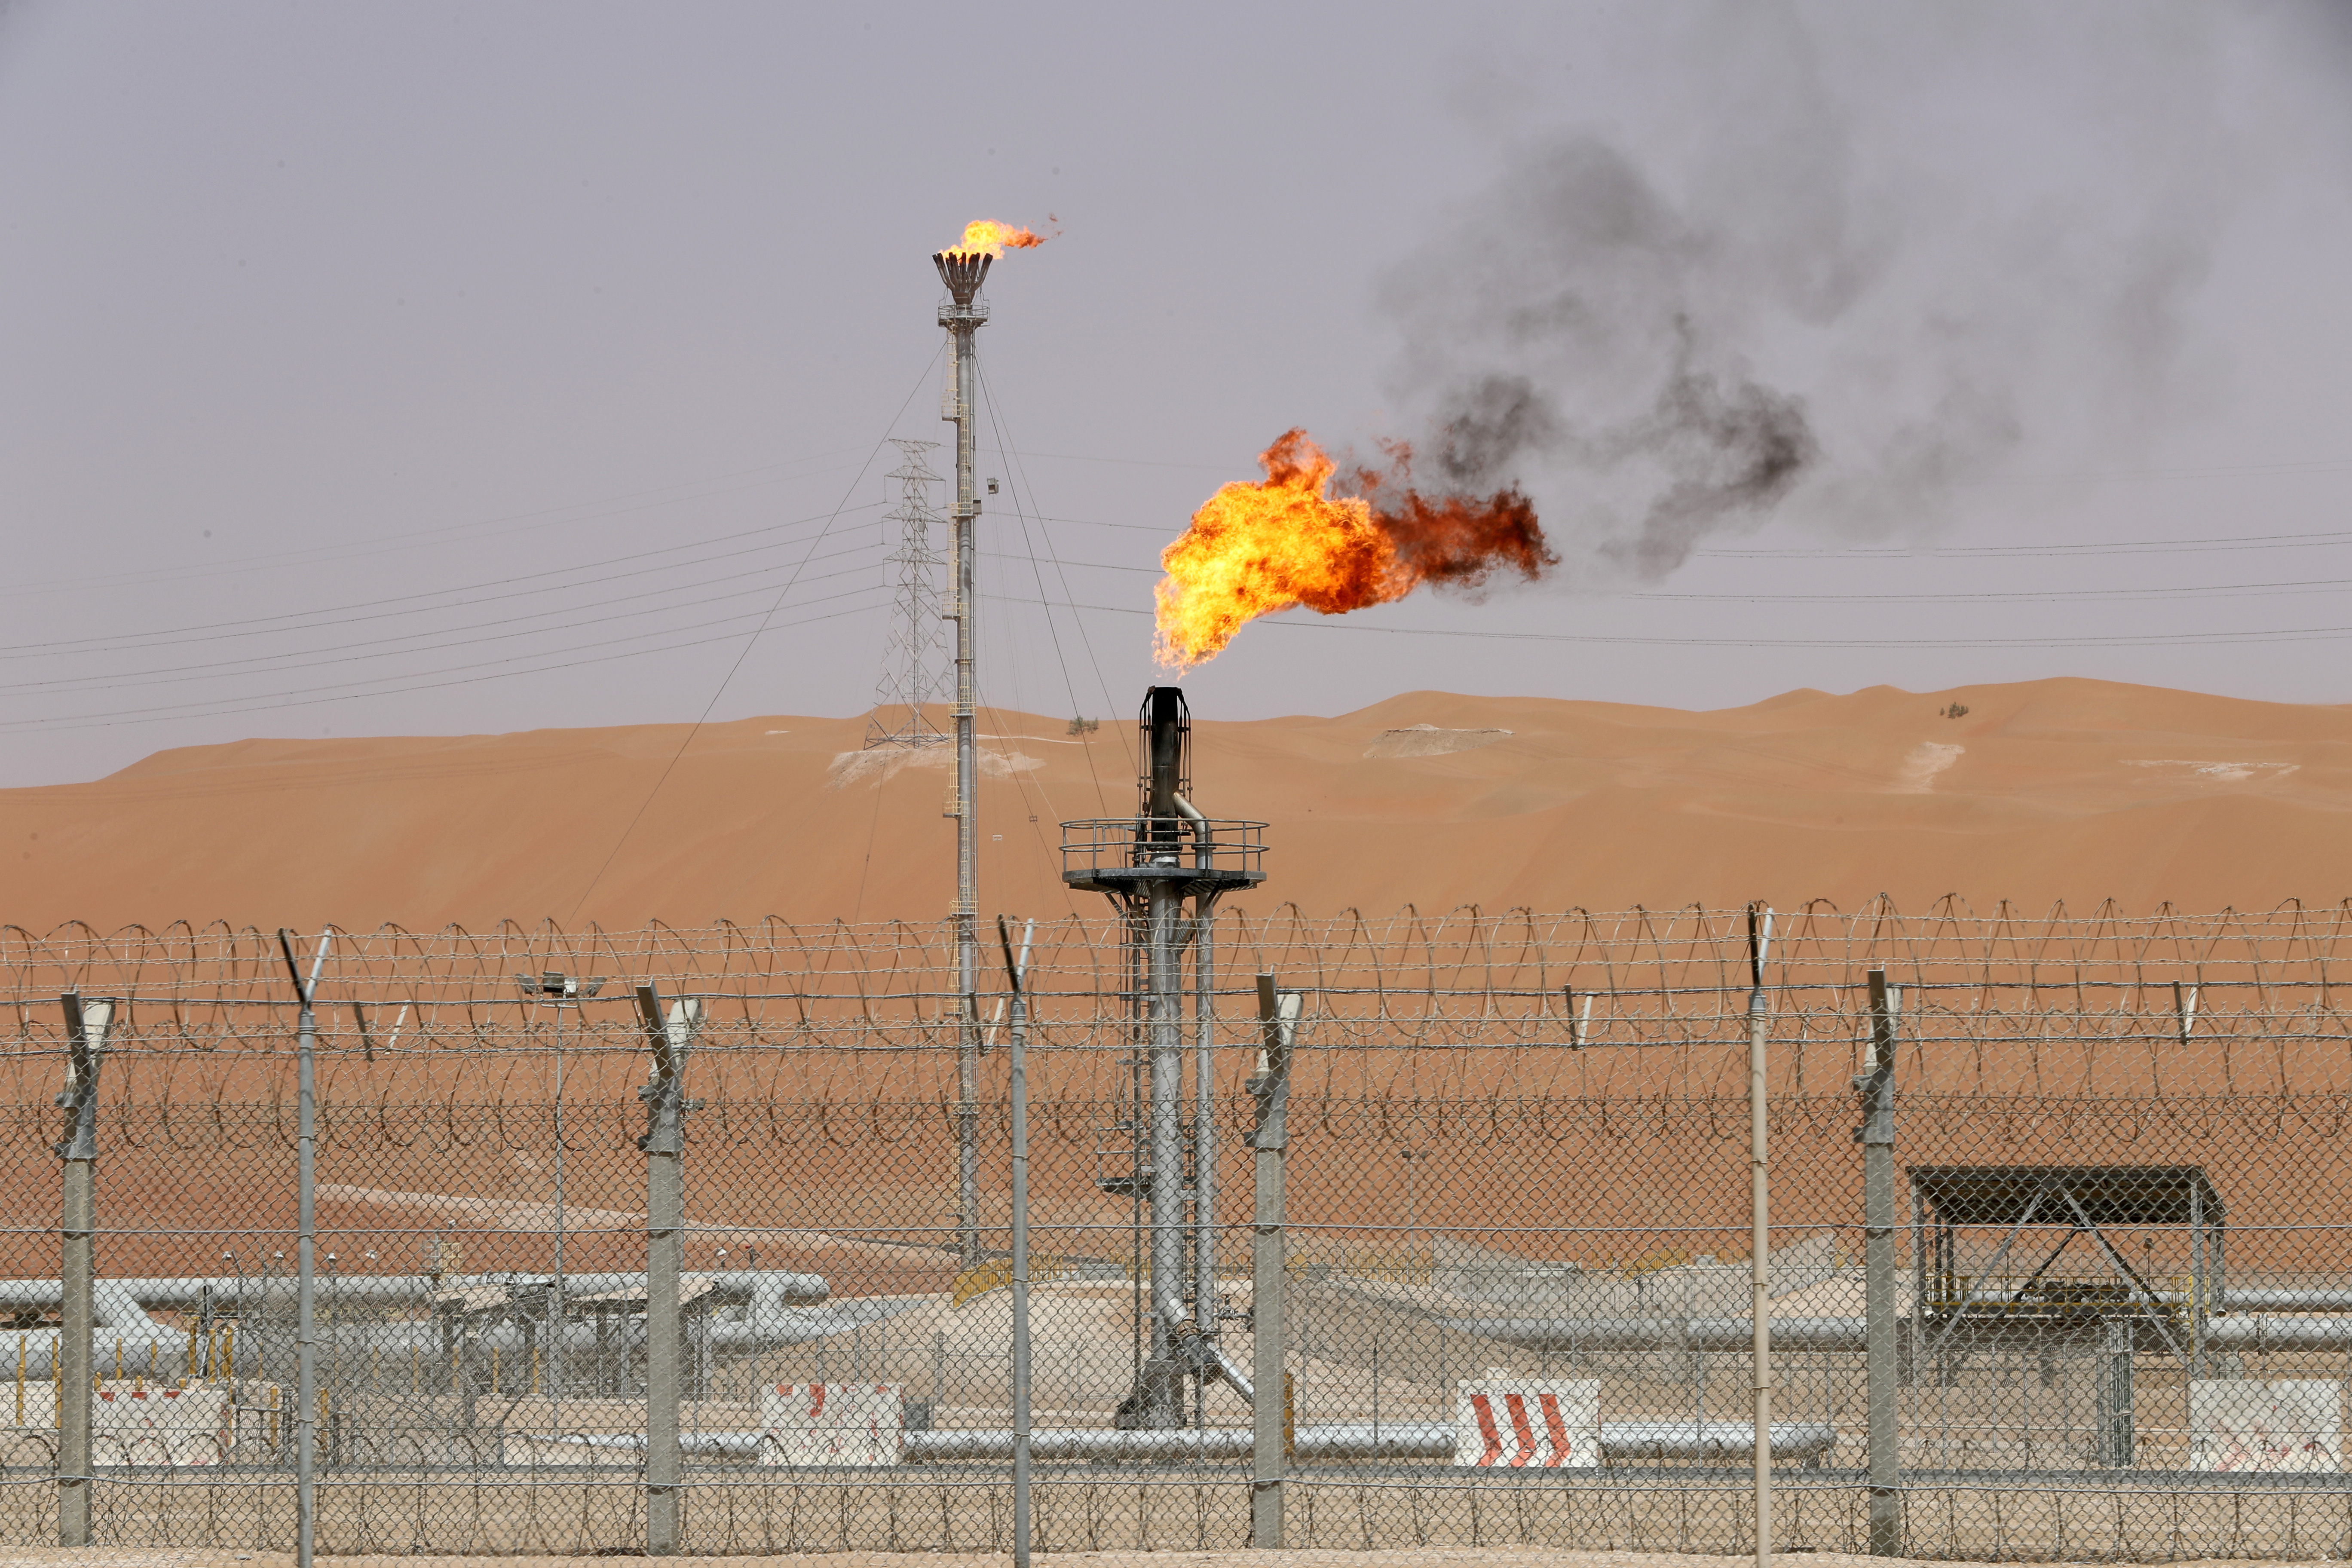 Flames are seen at the production facility of Saudi Aramco's Shaybah oilfield in the Empty Quarter